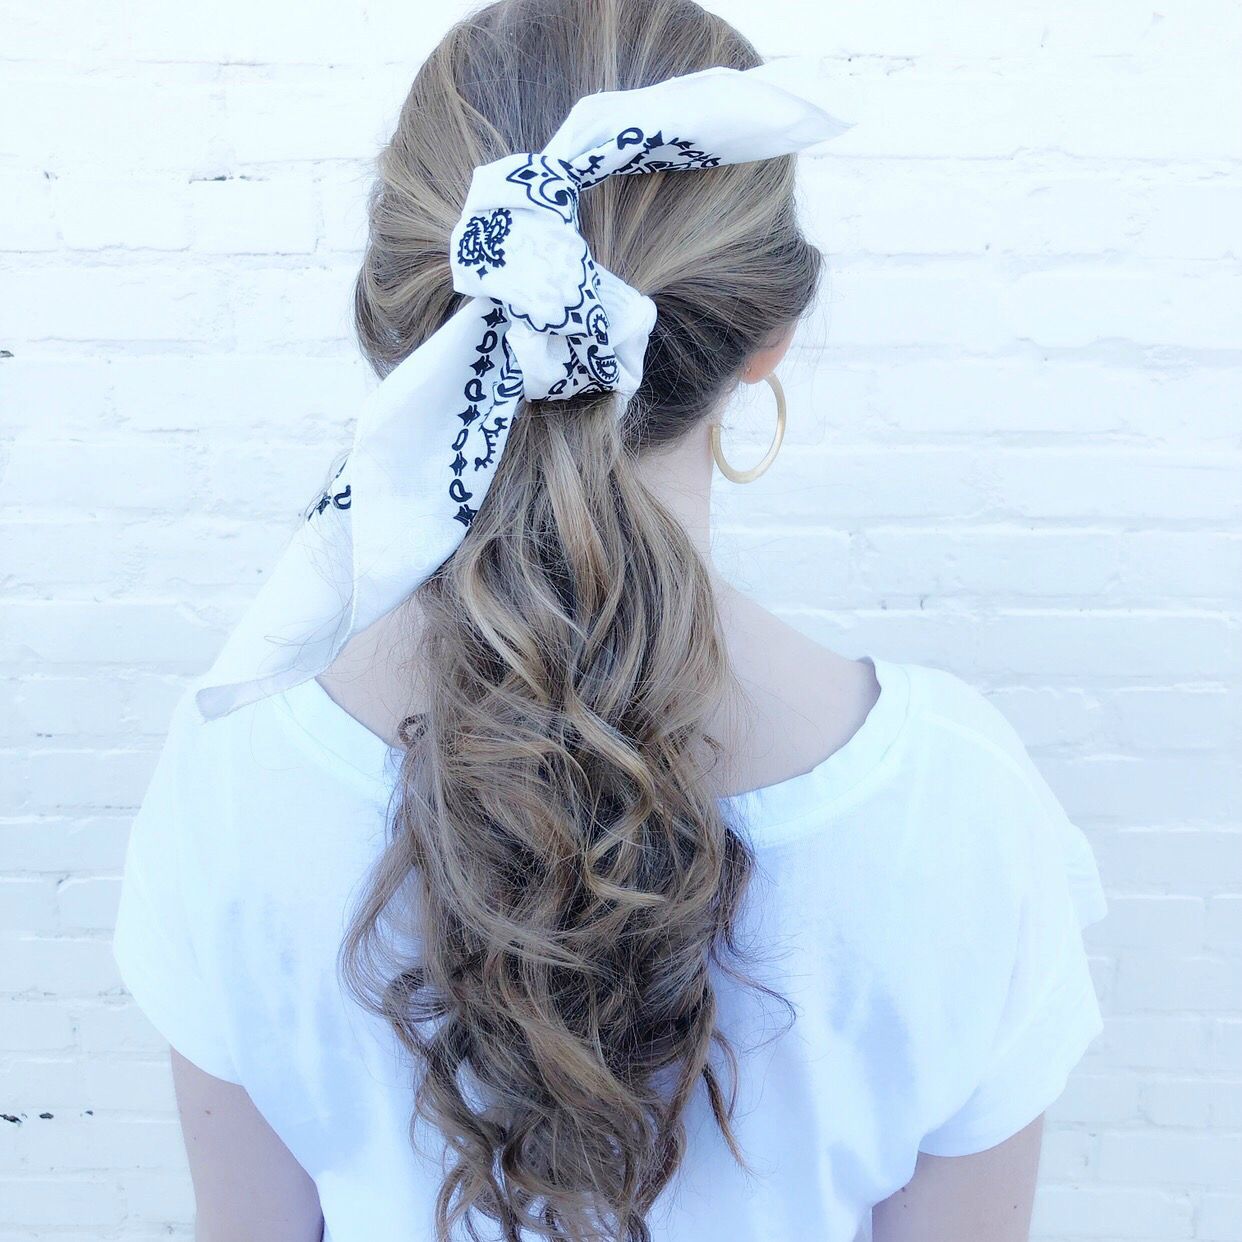 Moon and Lola - Traditional Bandana in White tied to low ponytail